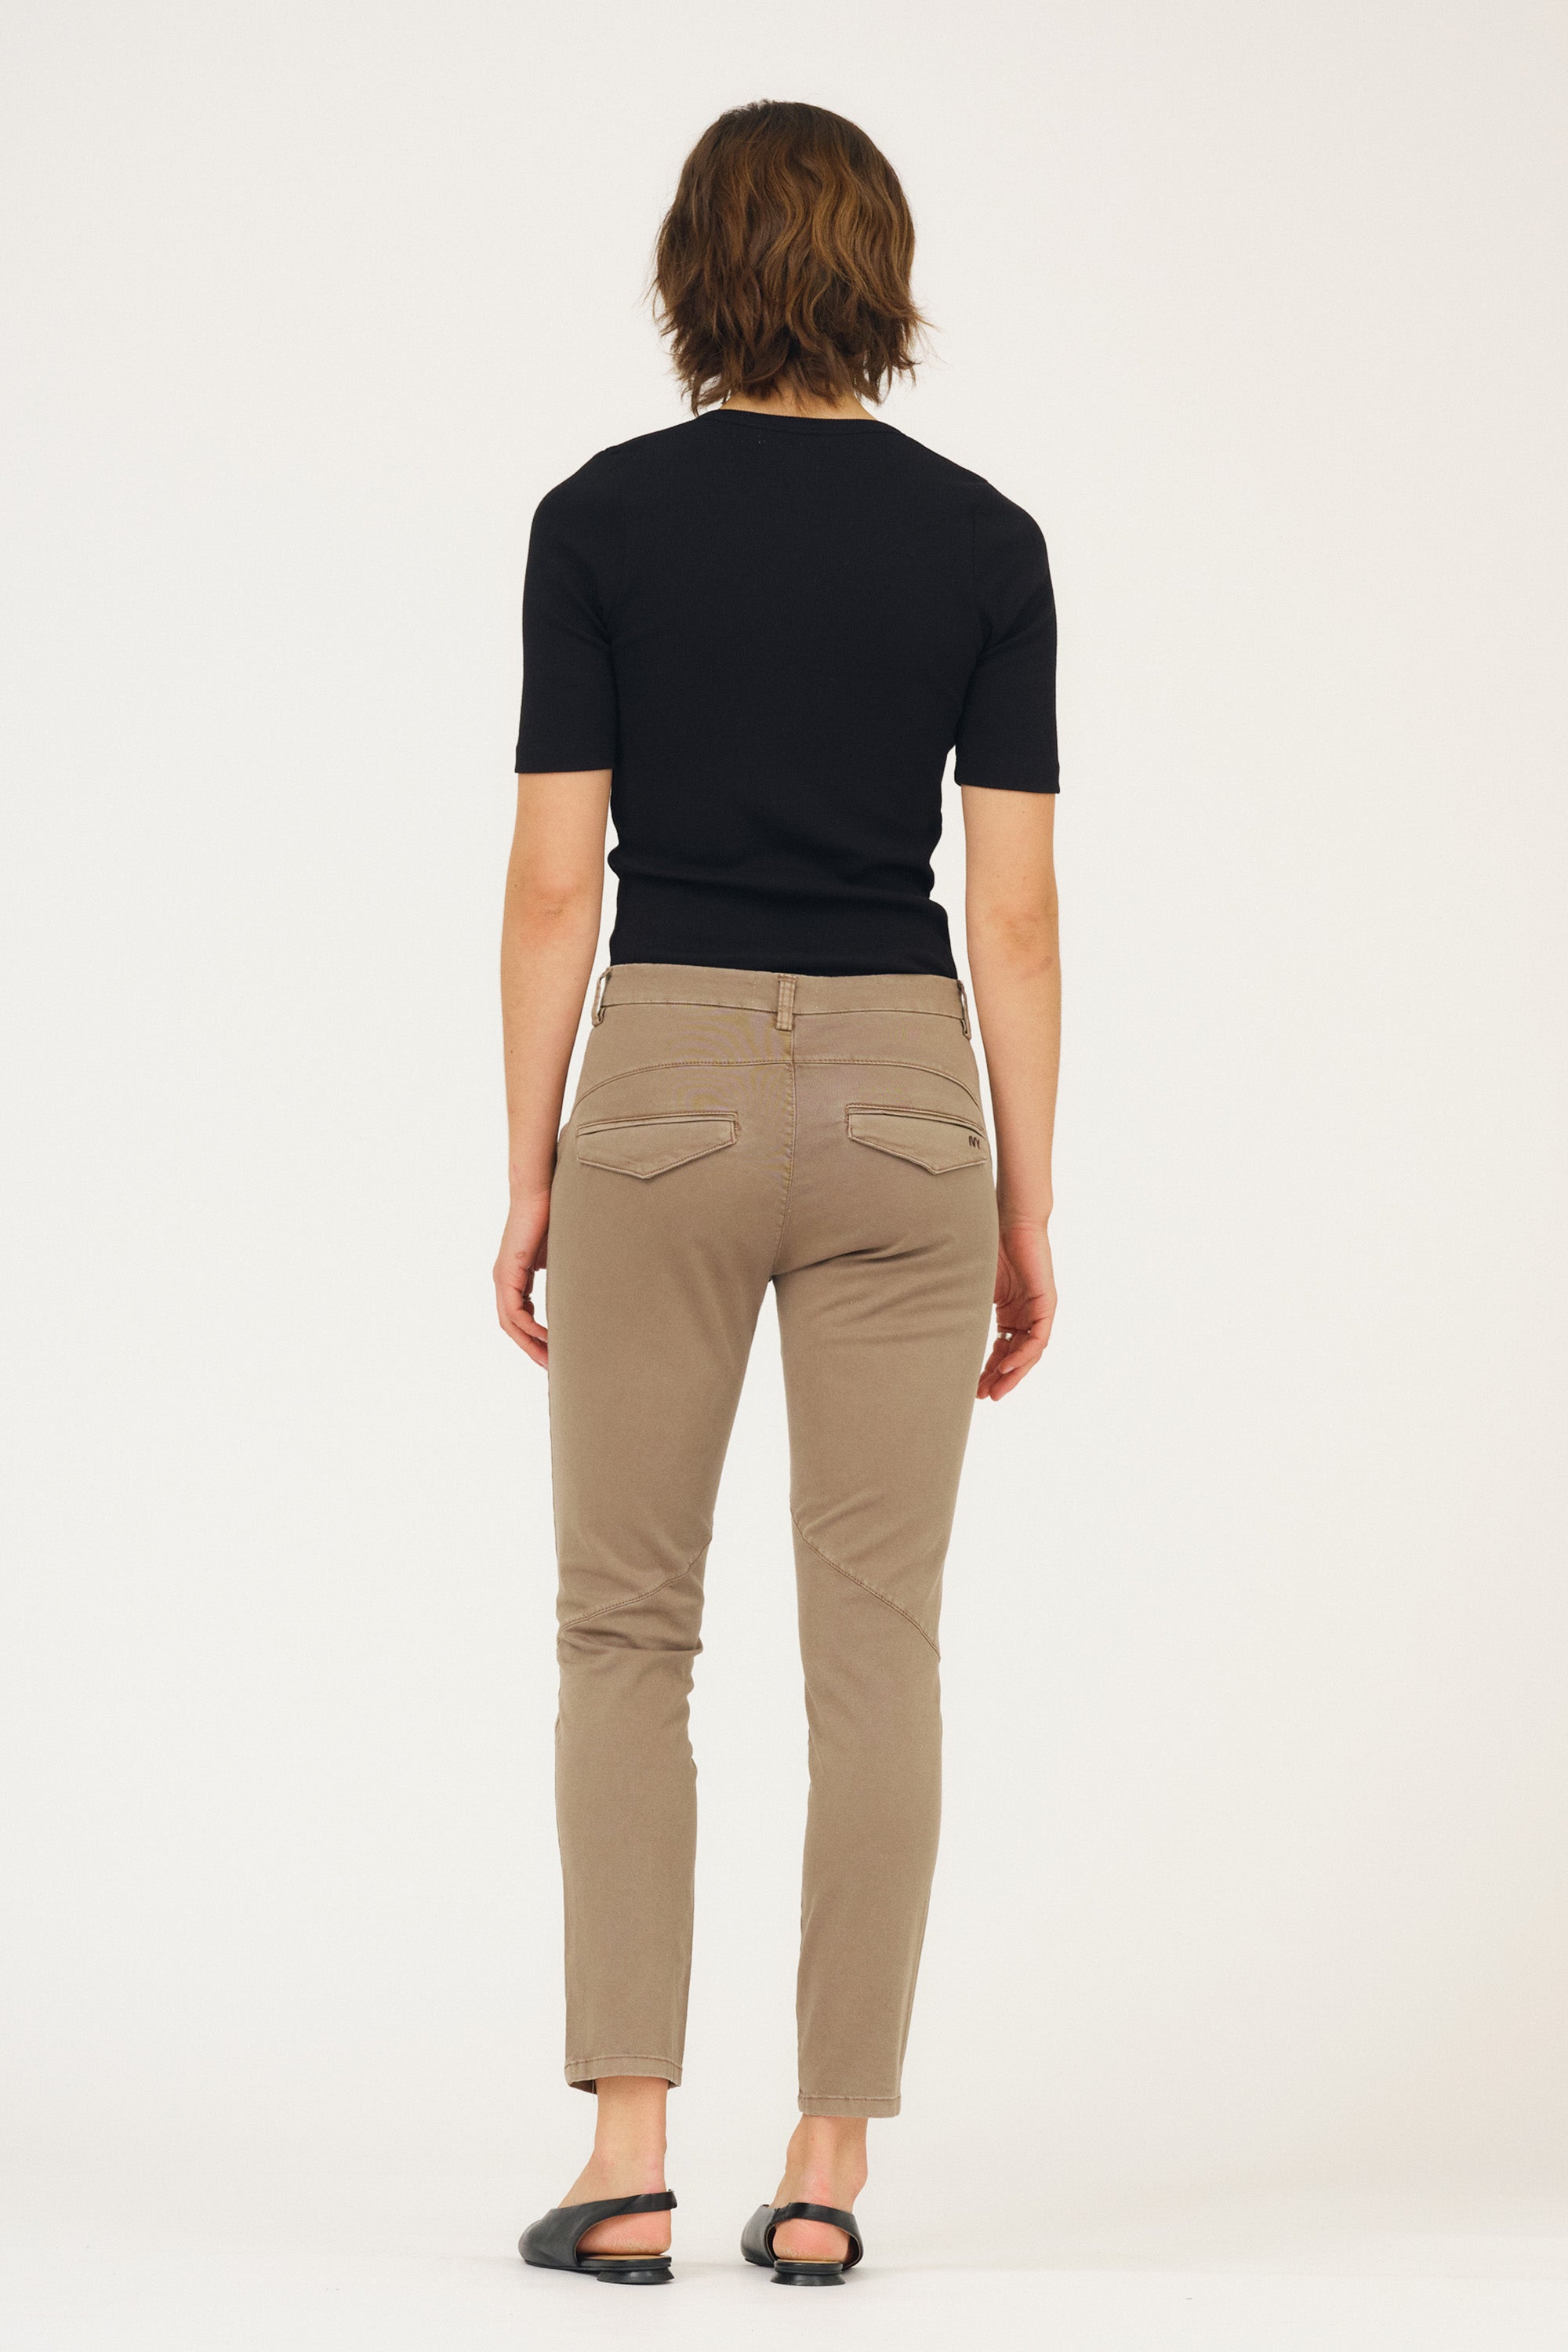 BOSS Golf Trousers - T_ATG Slim - Taupe FA23